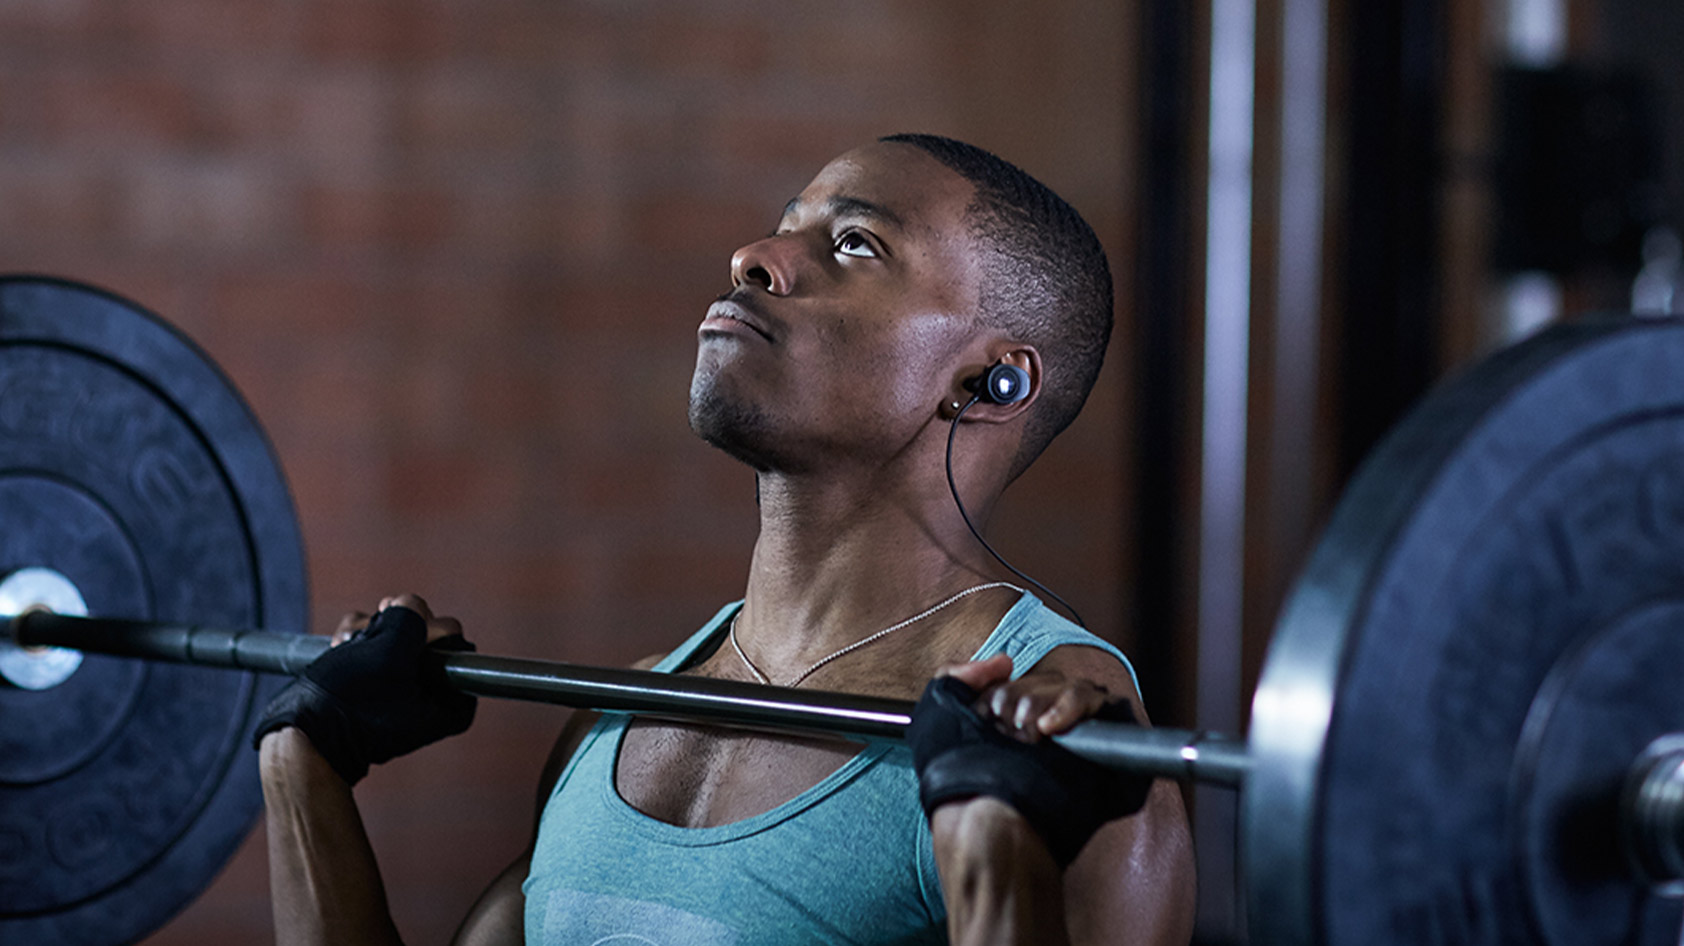 Bose SoundSport Pulse Wireless heart rate monitor earbuds lifestyle image of a man weight lifting.